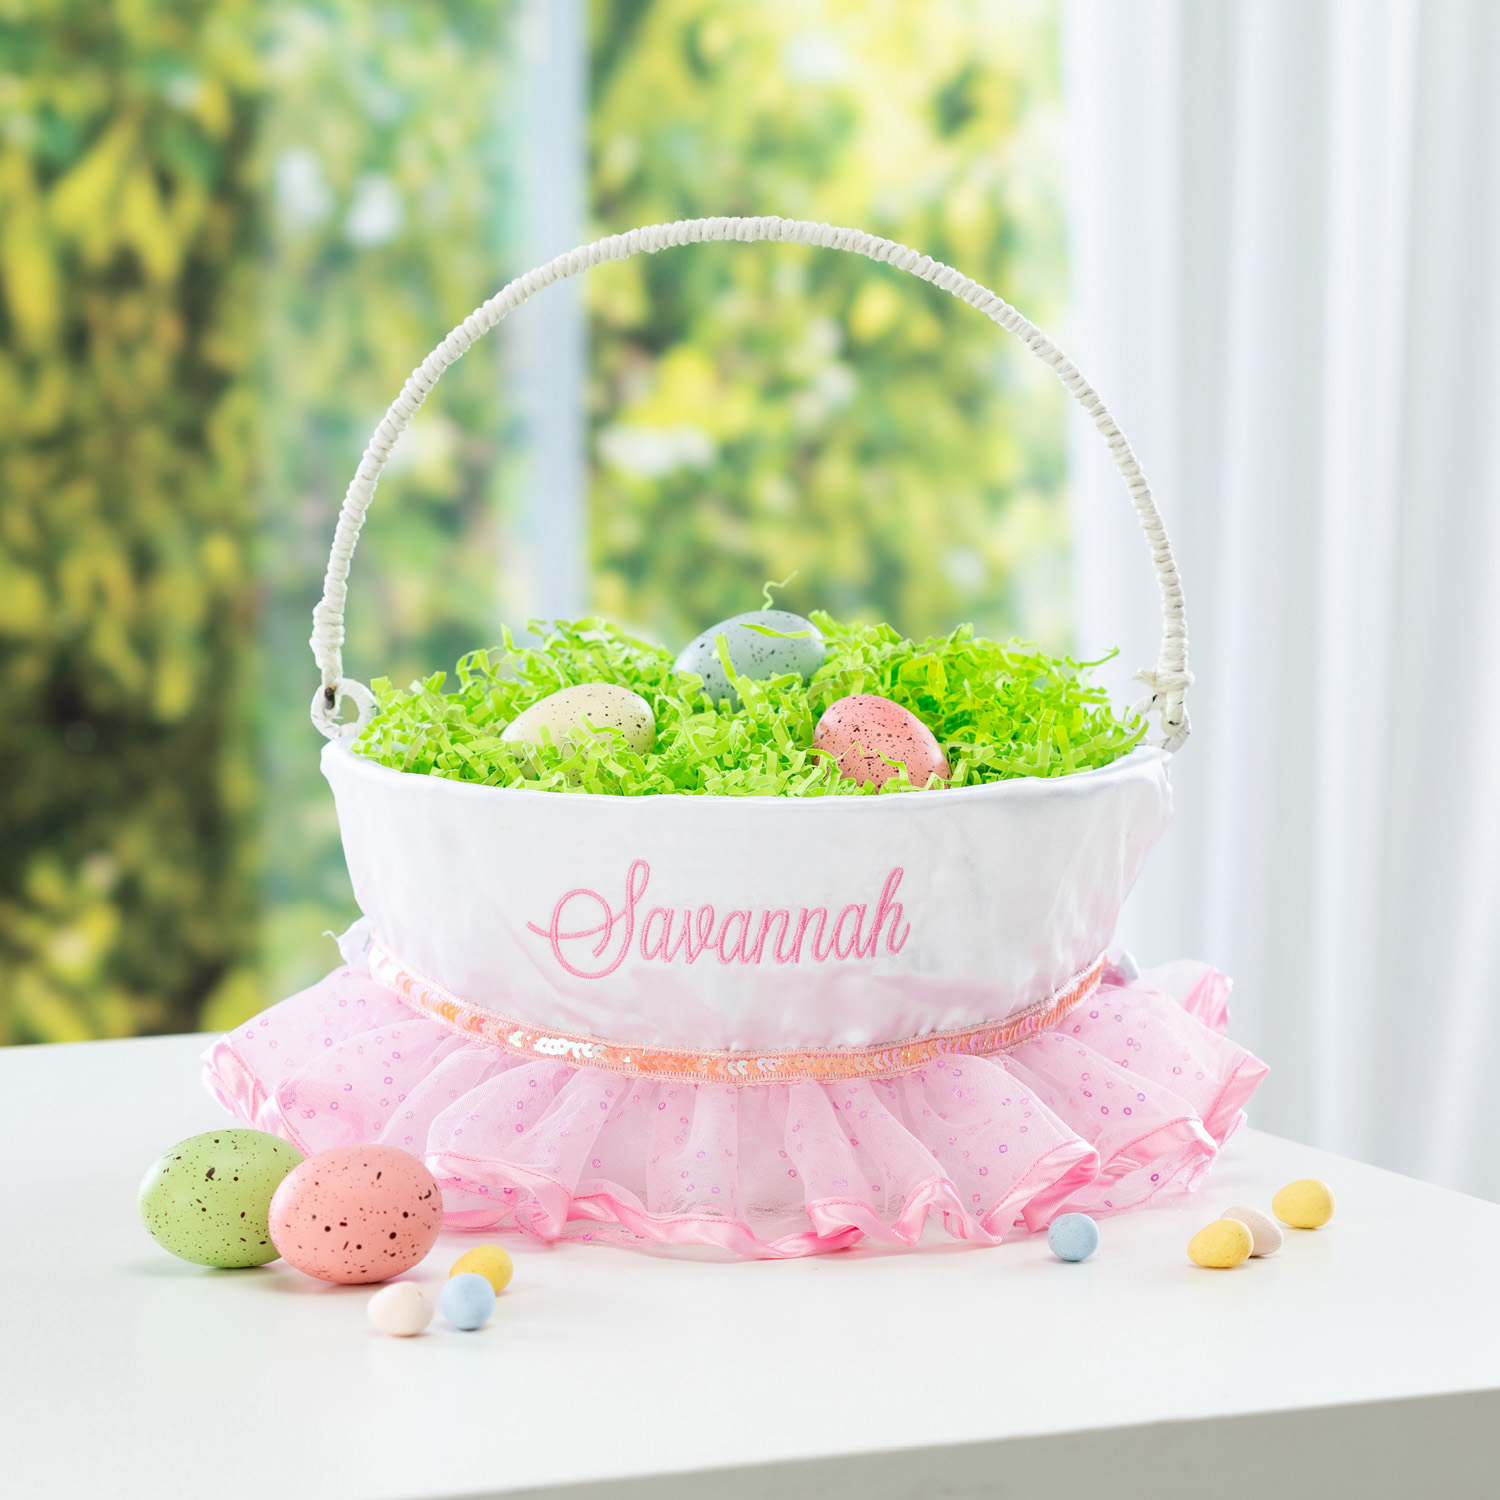 Personalized Planet Pink and White Tutu Liner with Custom Name Embroidered in Pink Thread on White Woven Spring Easter Basket with Collapsible Handle for Egg Hunt or Book Toy Storage - image 2 of 5